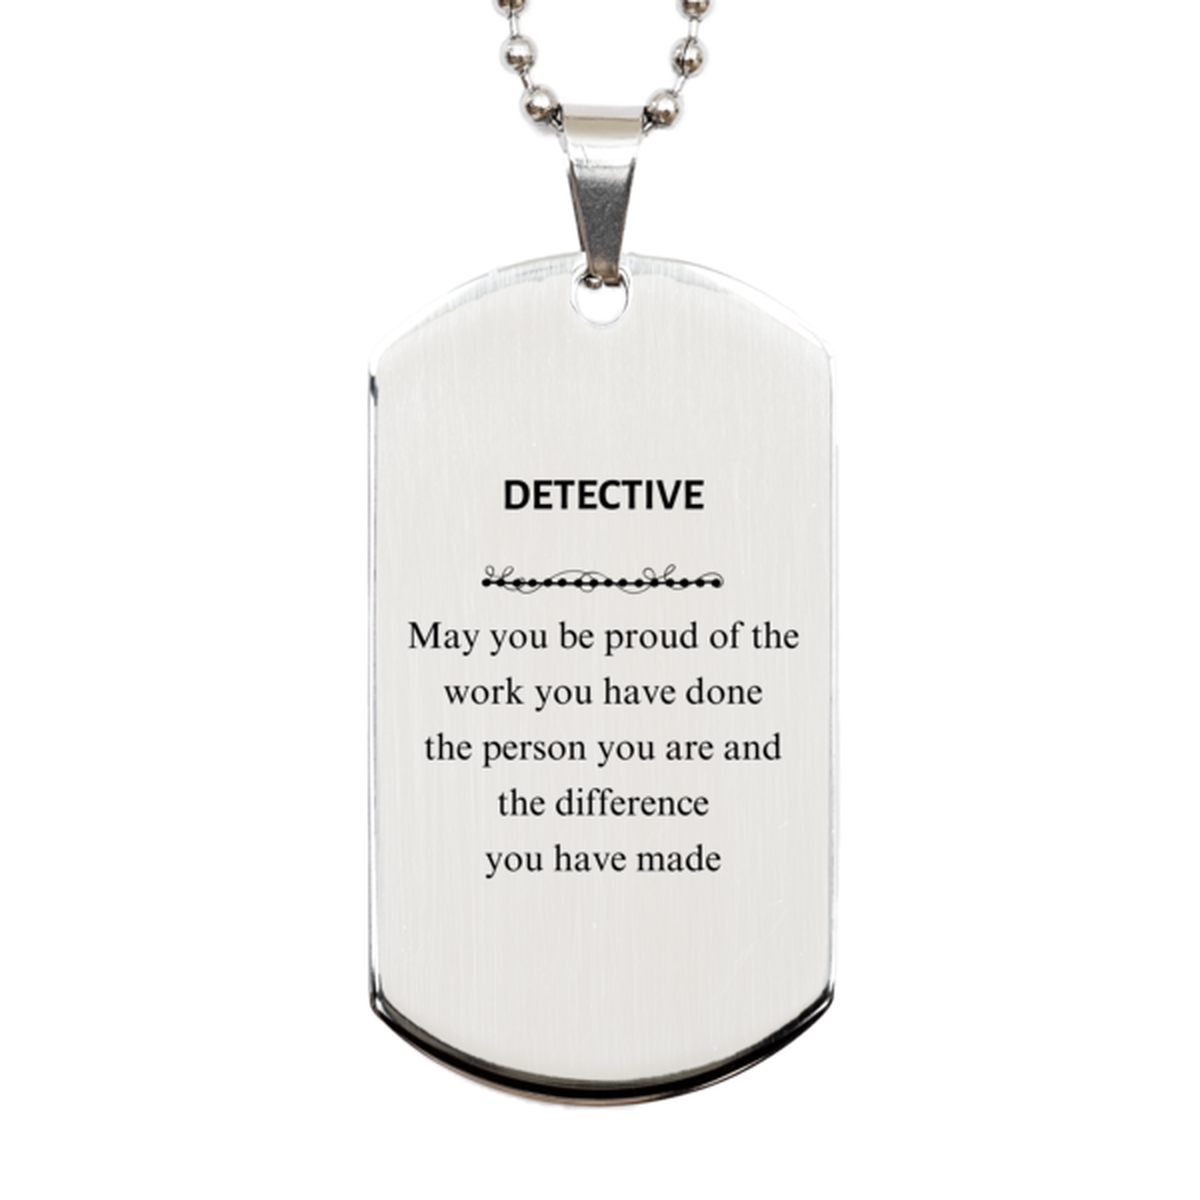 Detective May you be proud of the work you have done, Retirement Detective Silver Dog Tag for Colleague Appreciation Gifts Amazing for Detective